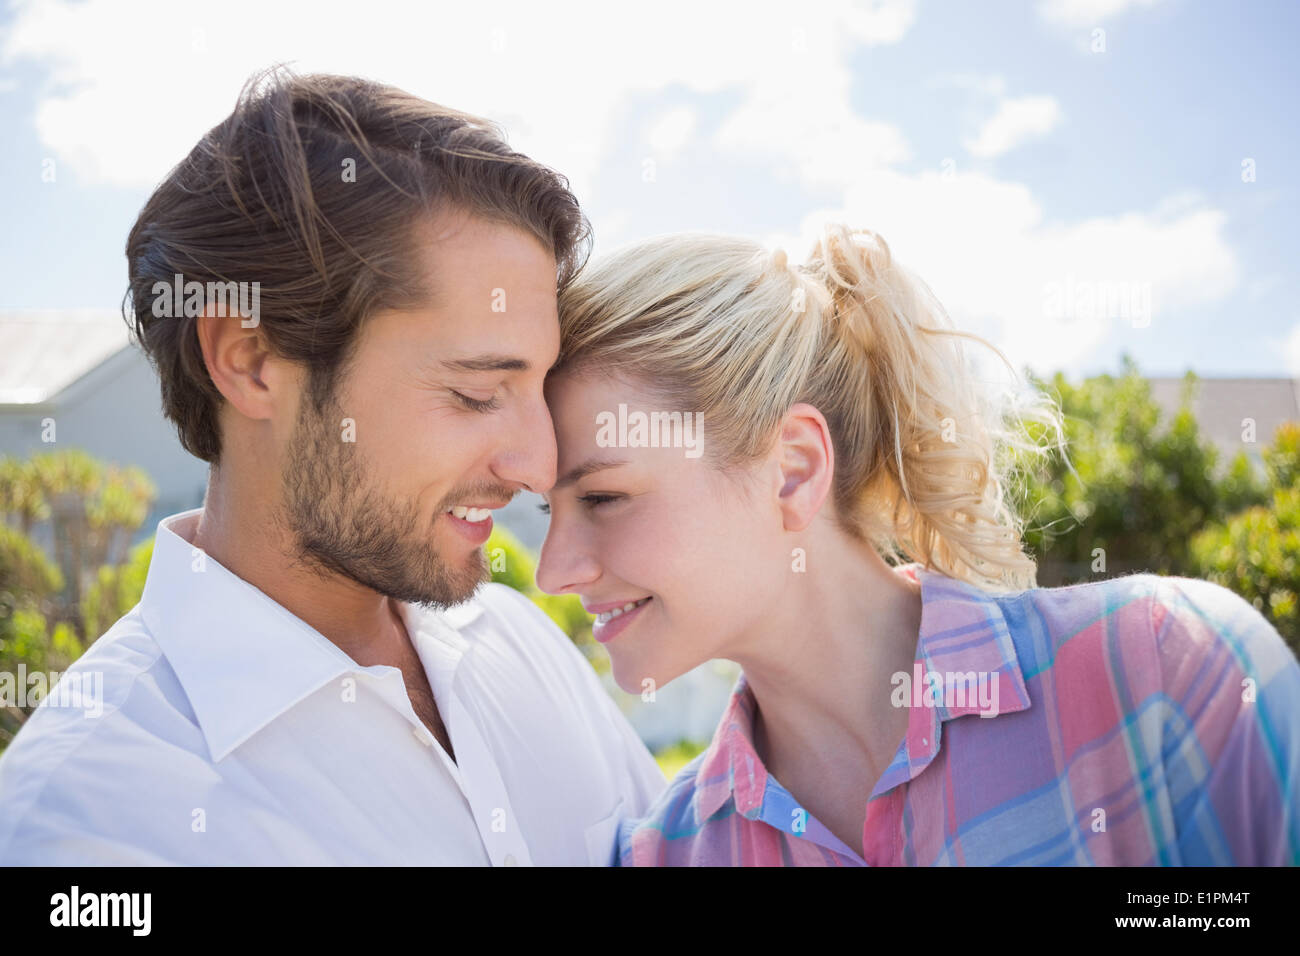 Cute couple spending time together outside Stock Photo